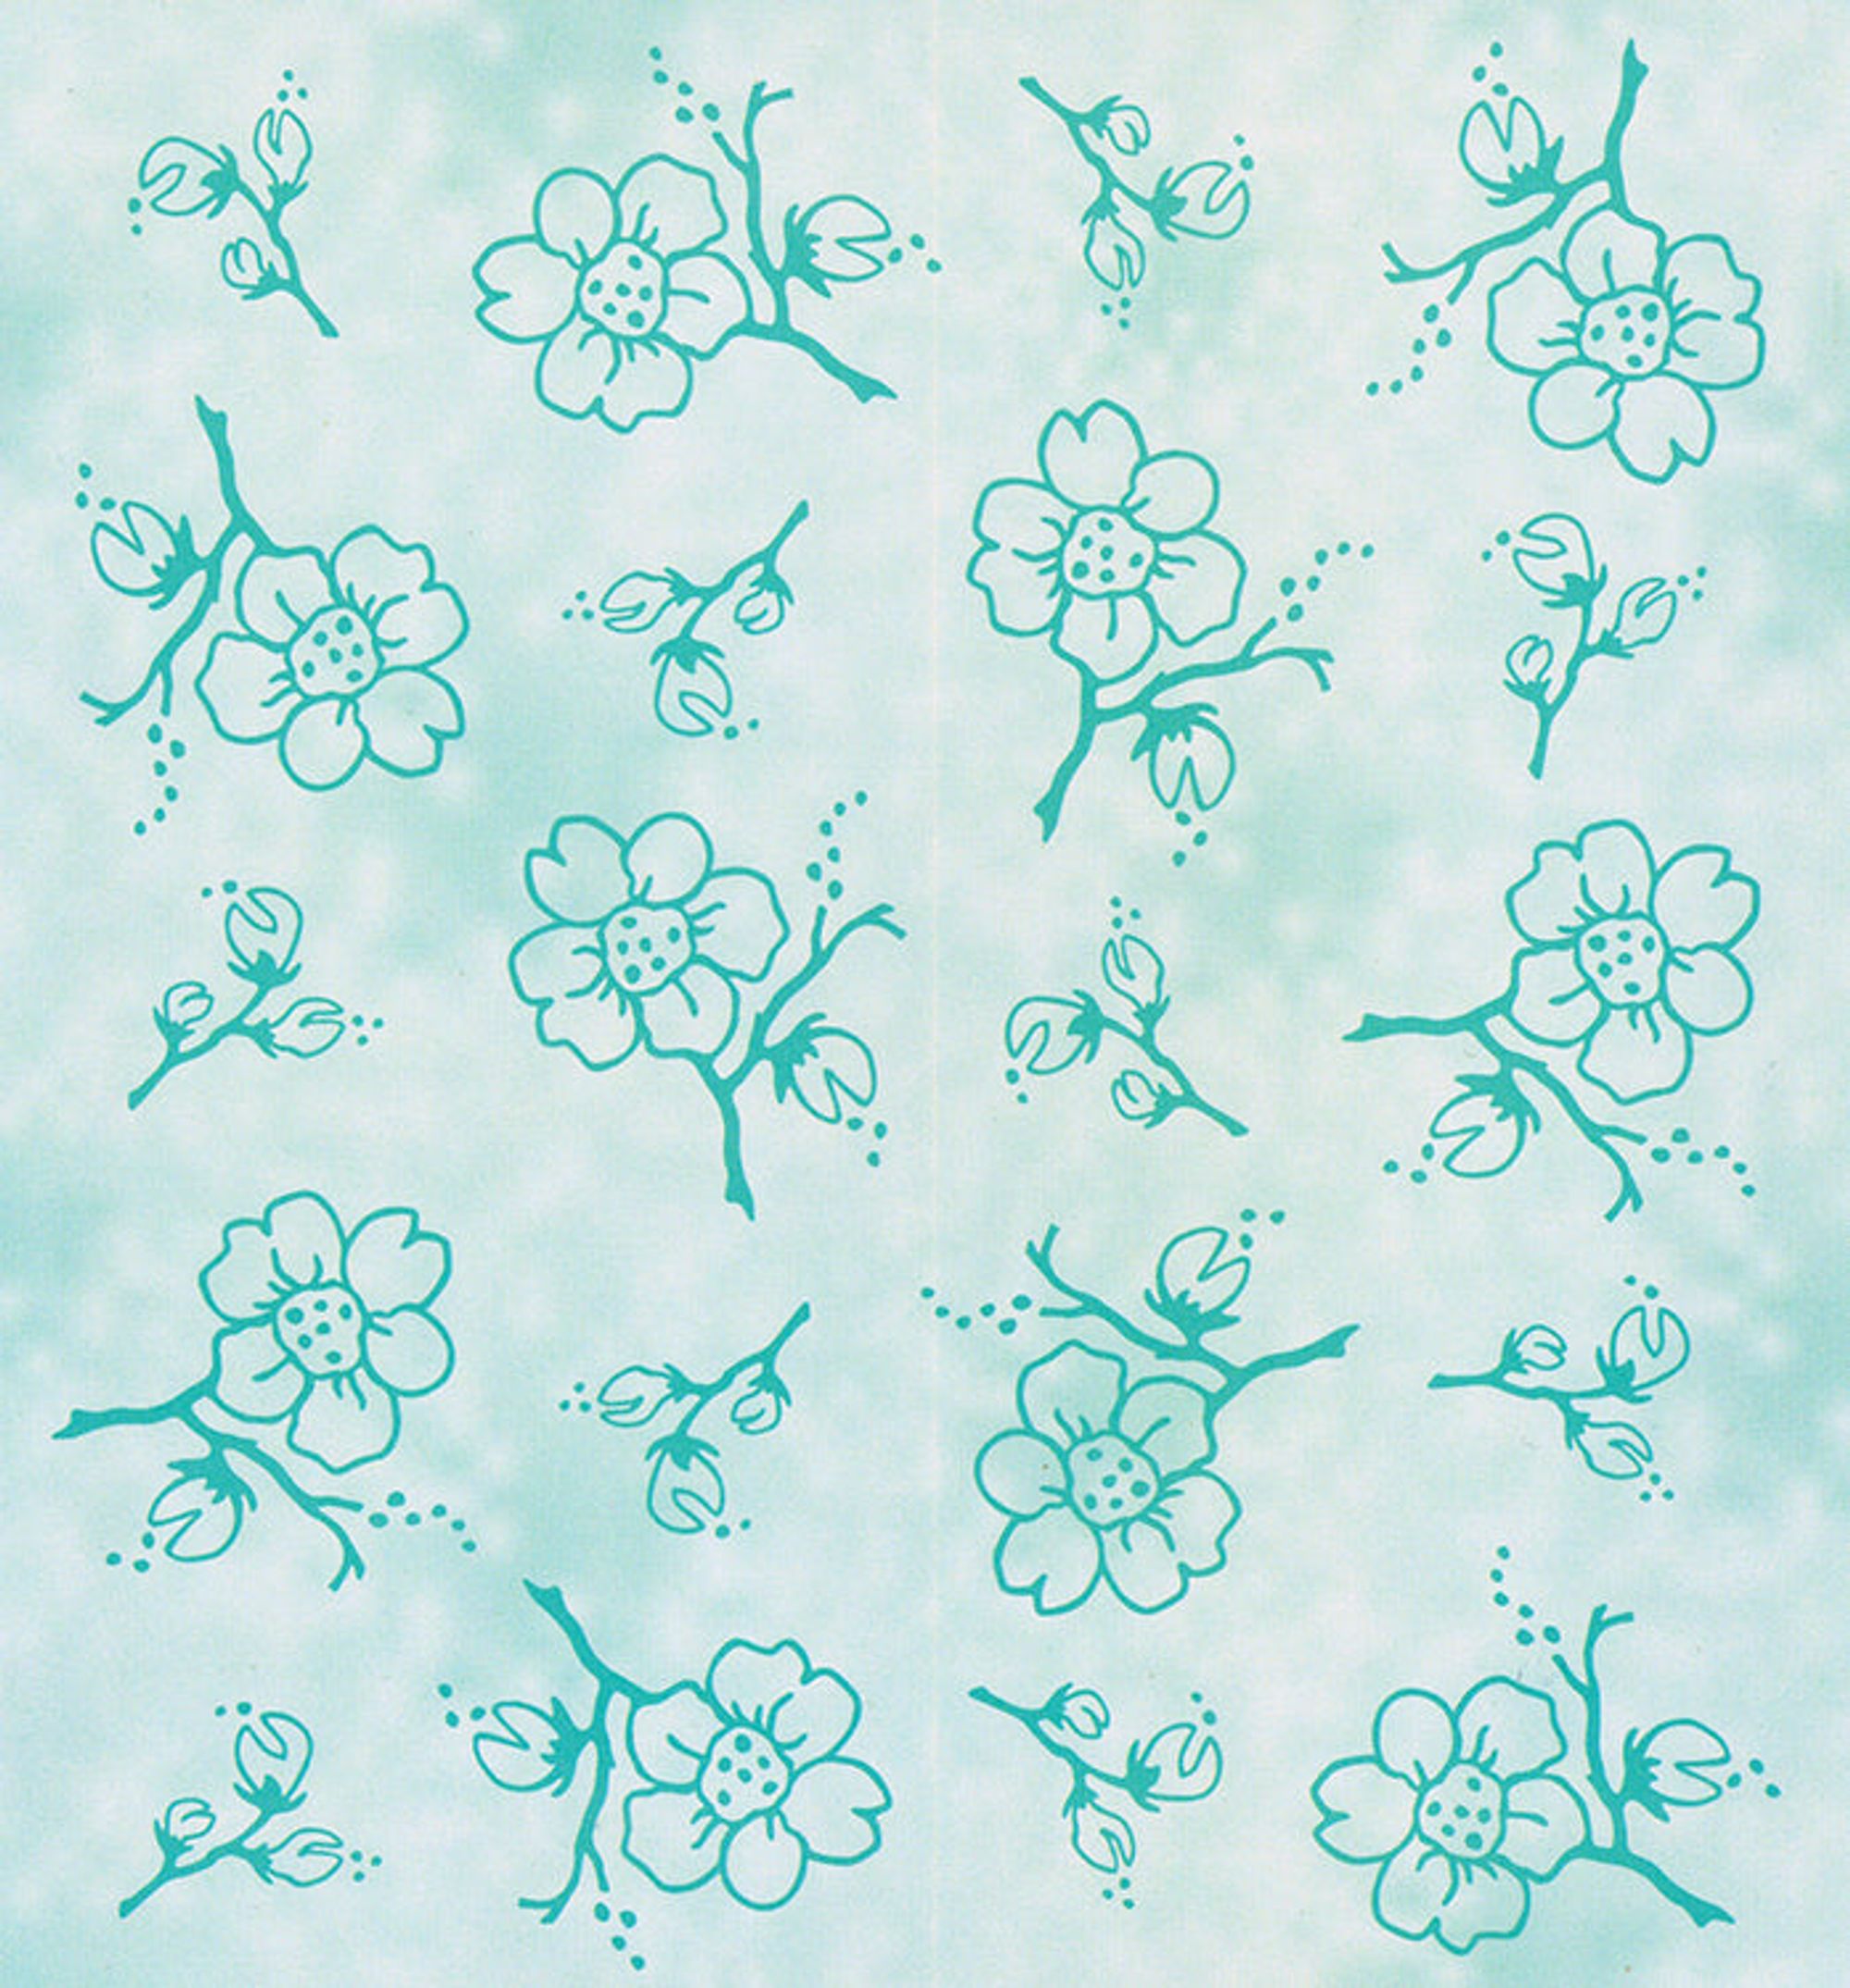 Nellie's Choice 4 x 6 3D Embossing Folder Branch with Flowers